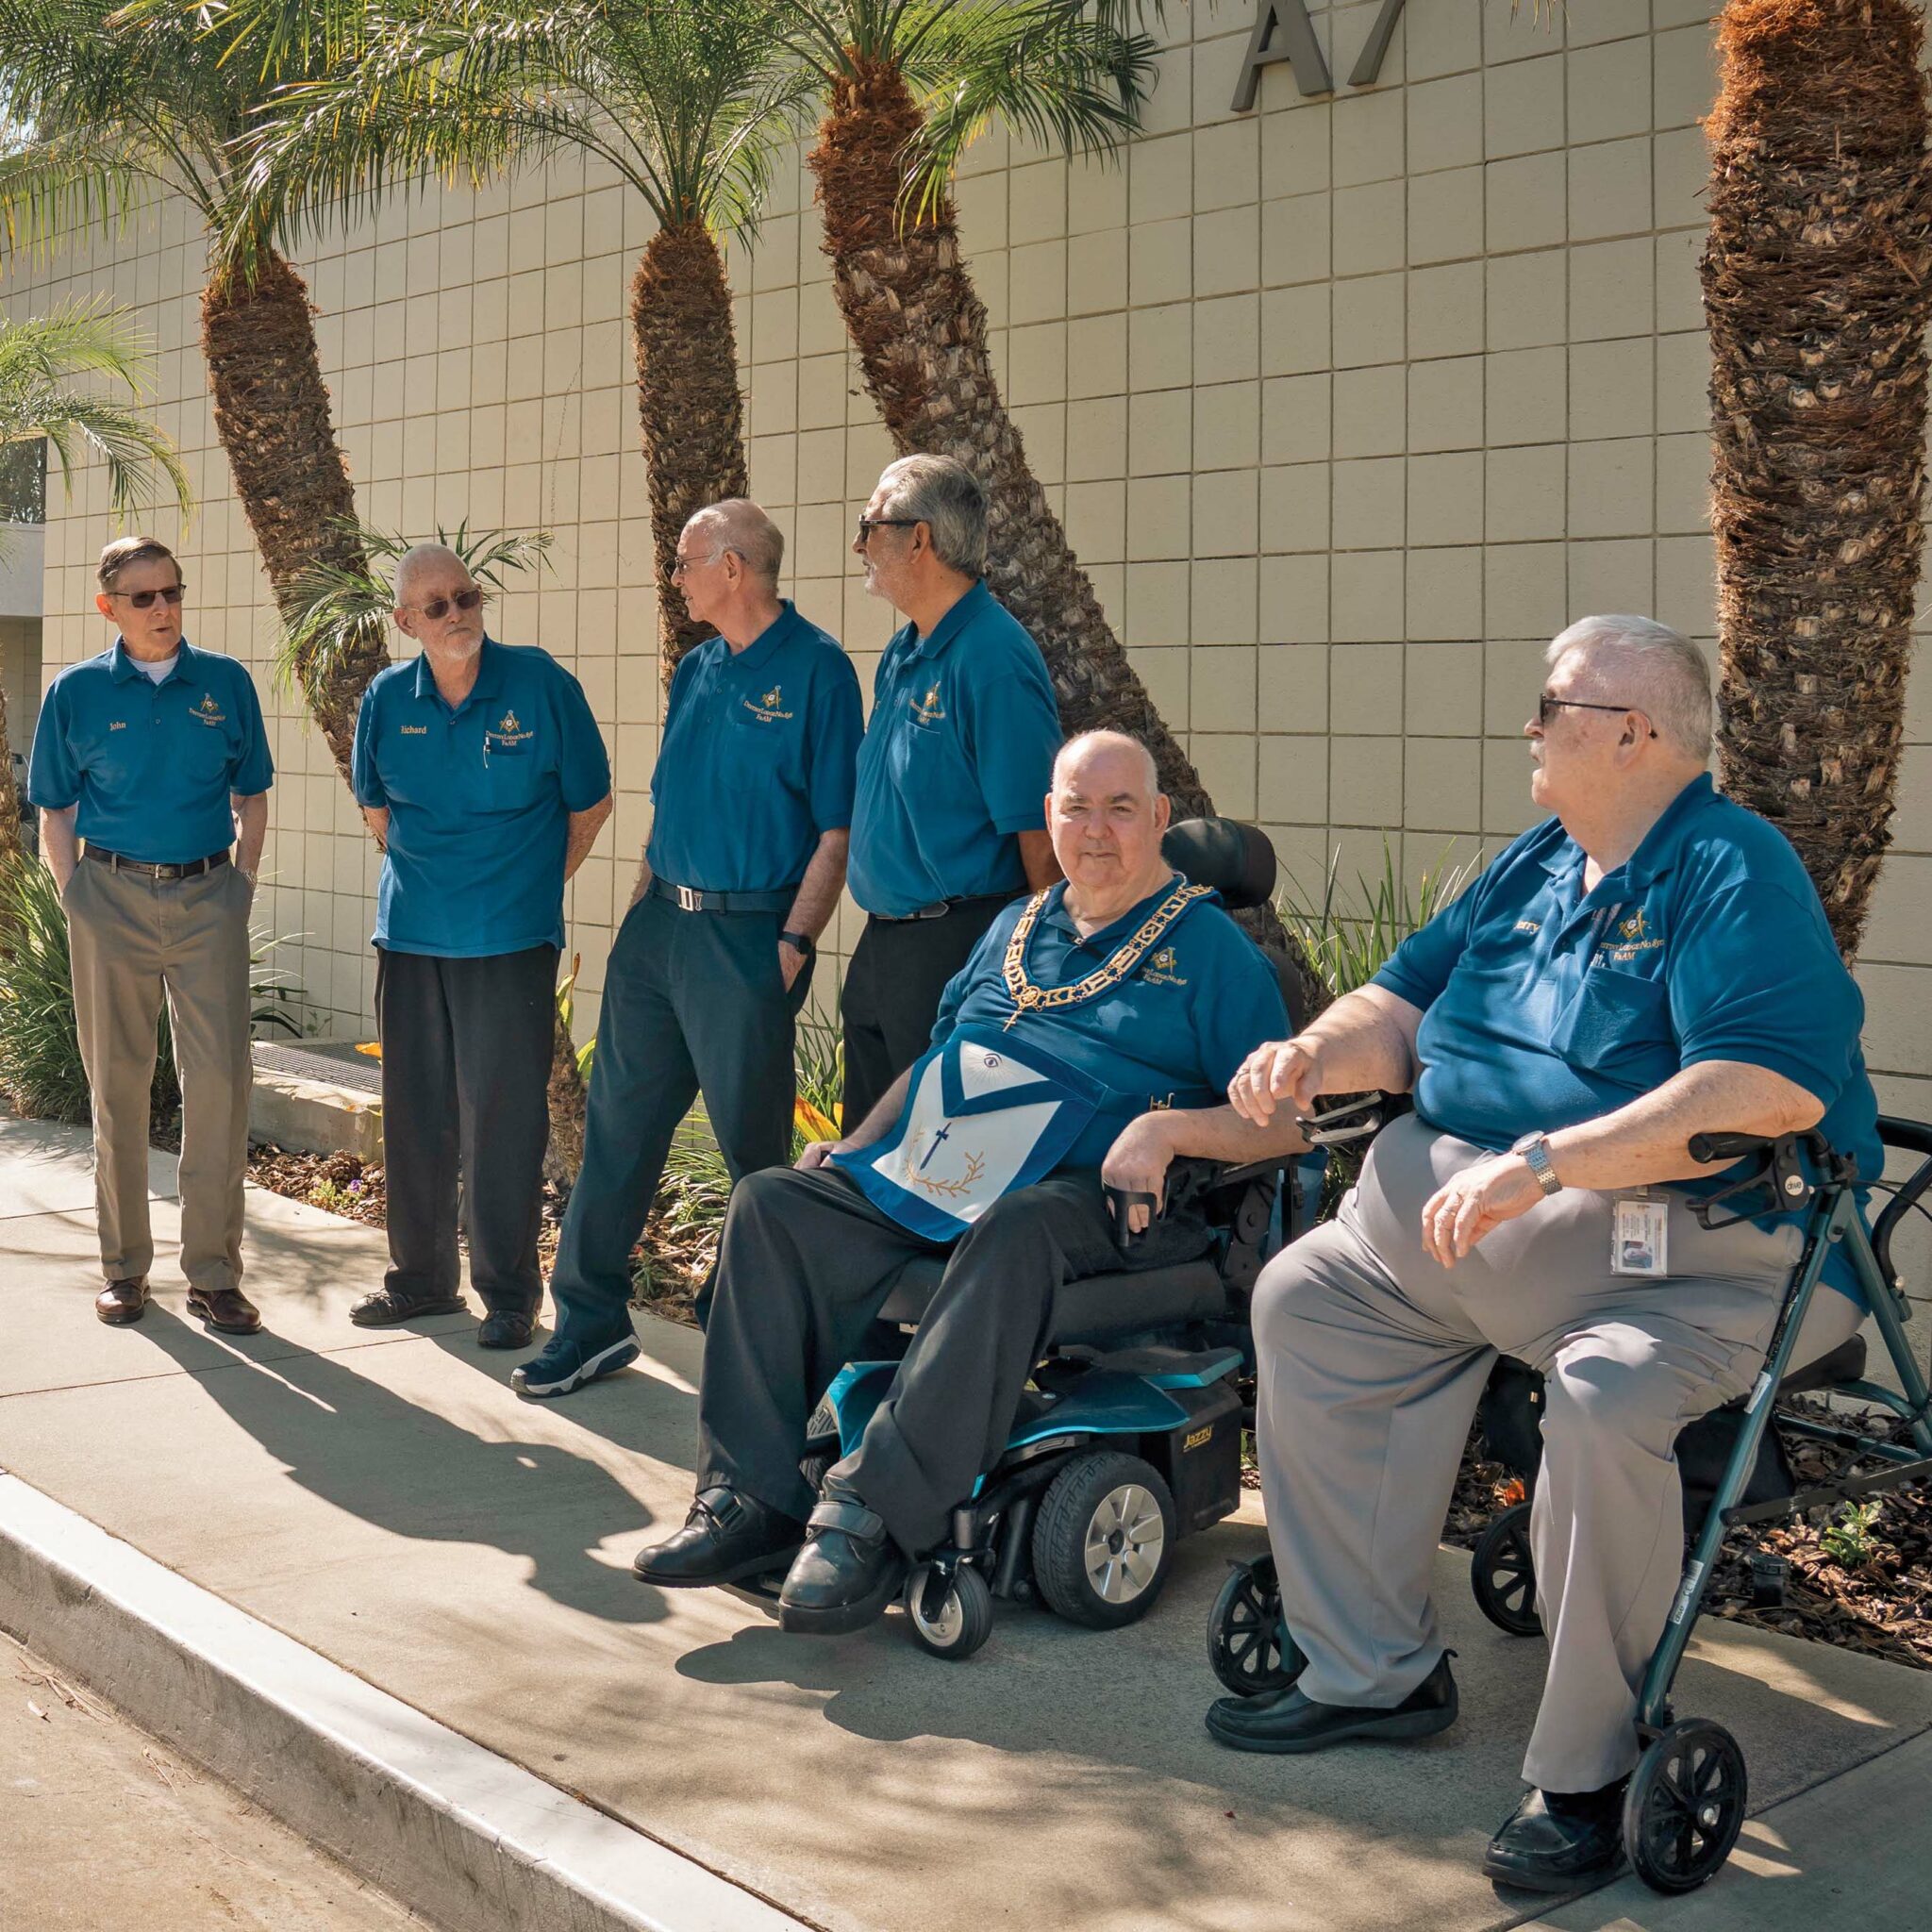 Members of Destiny Lodge No. 856 at the Masonic Homes in Covina